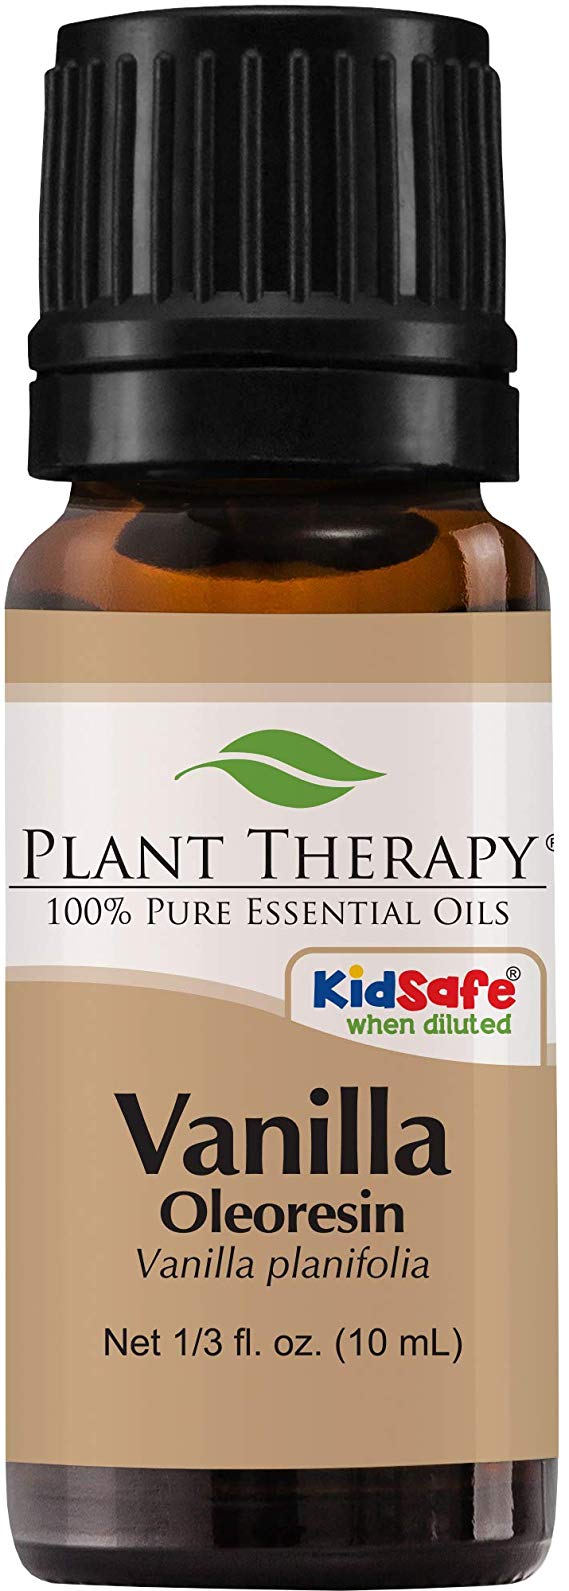 Plant Therapy Vanilla Oleoresin Essential Oil | 100% Pure, Undiluted, Natural Aromatherapy, Therapeutic Grade | 10 milliliter (1/3 ounce)